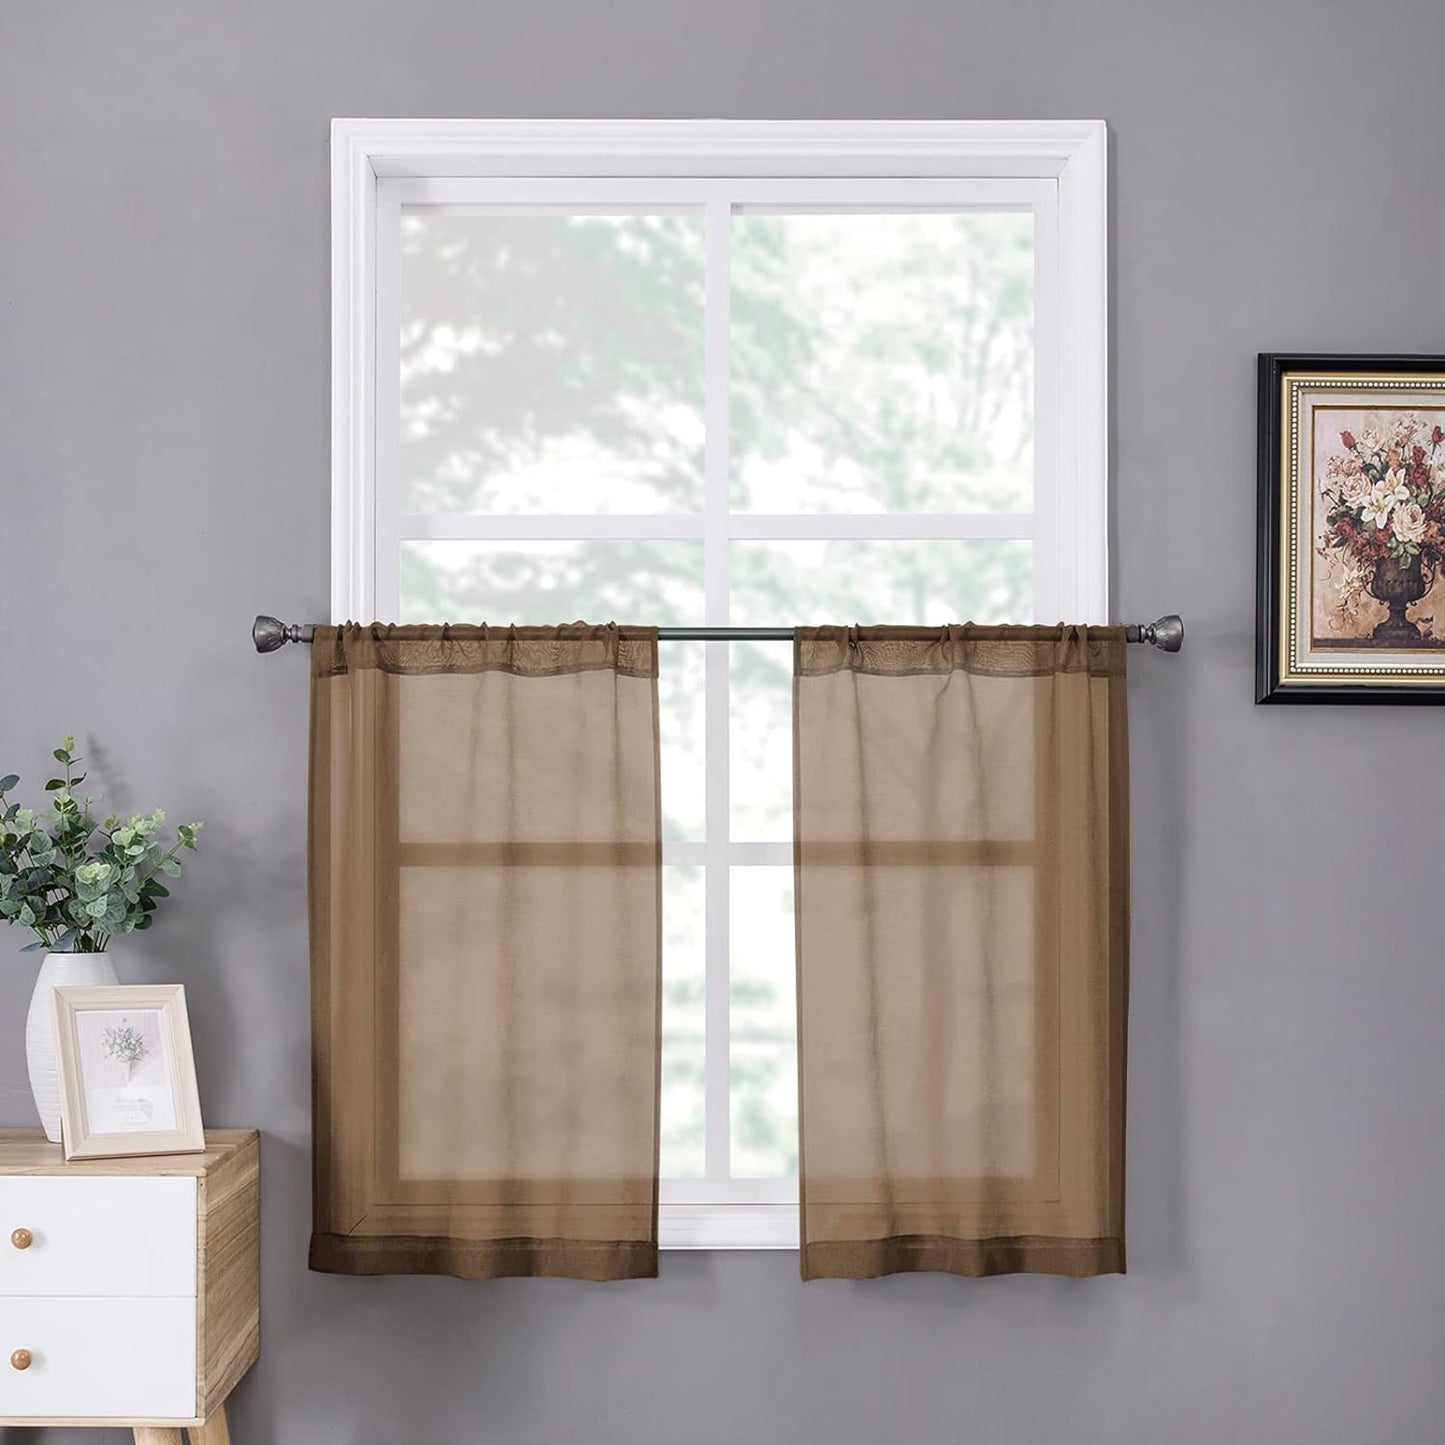 Tollpiz Short Sheer Curtains Linen Textured Bedroom Curtain Sheers Light Filtering Rod Pocket Voile Curtains for Living Room, 54 X 45 Inches Long, White, Set of 2 Panels  Tollpiz Tex Brown 25"W X 24"L 